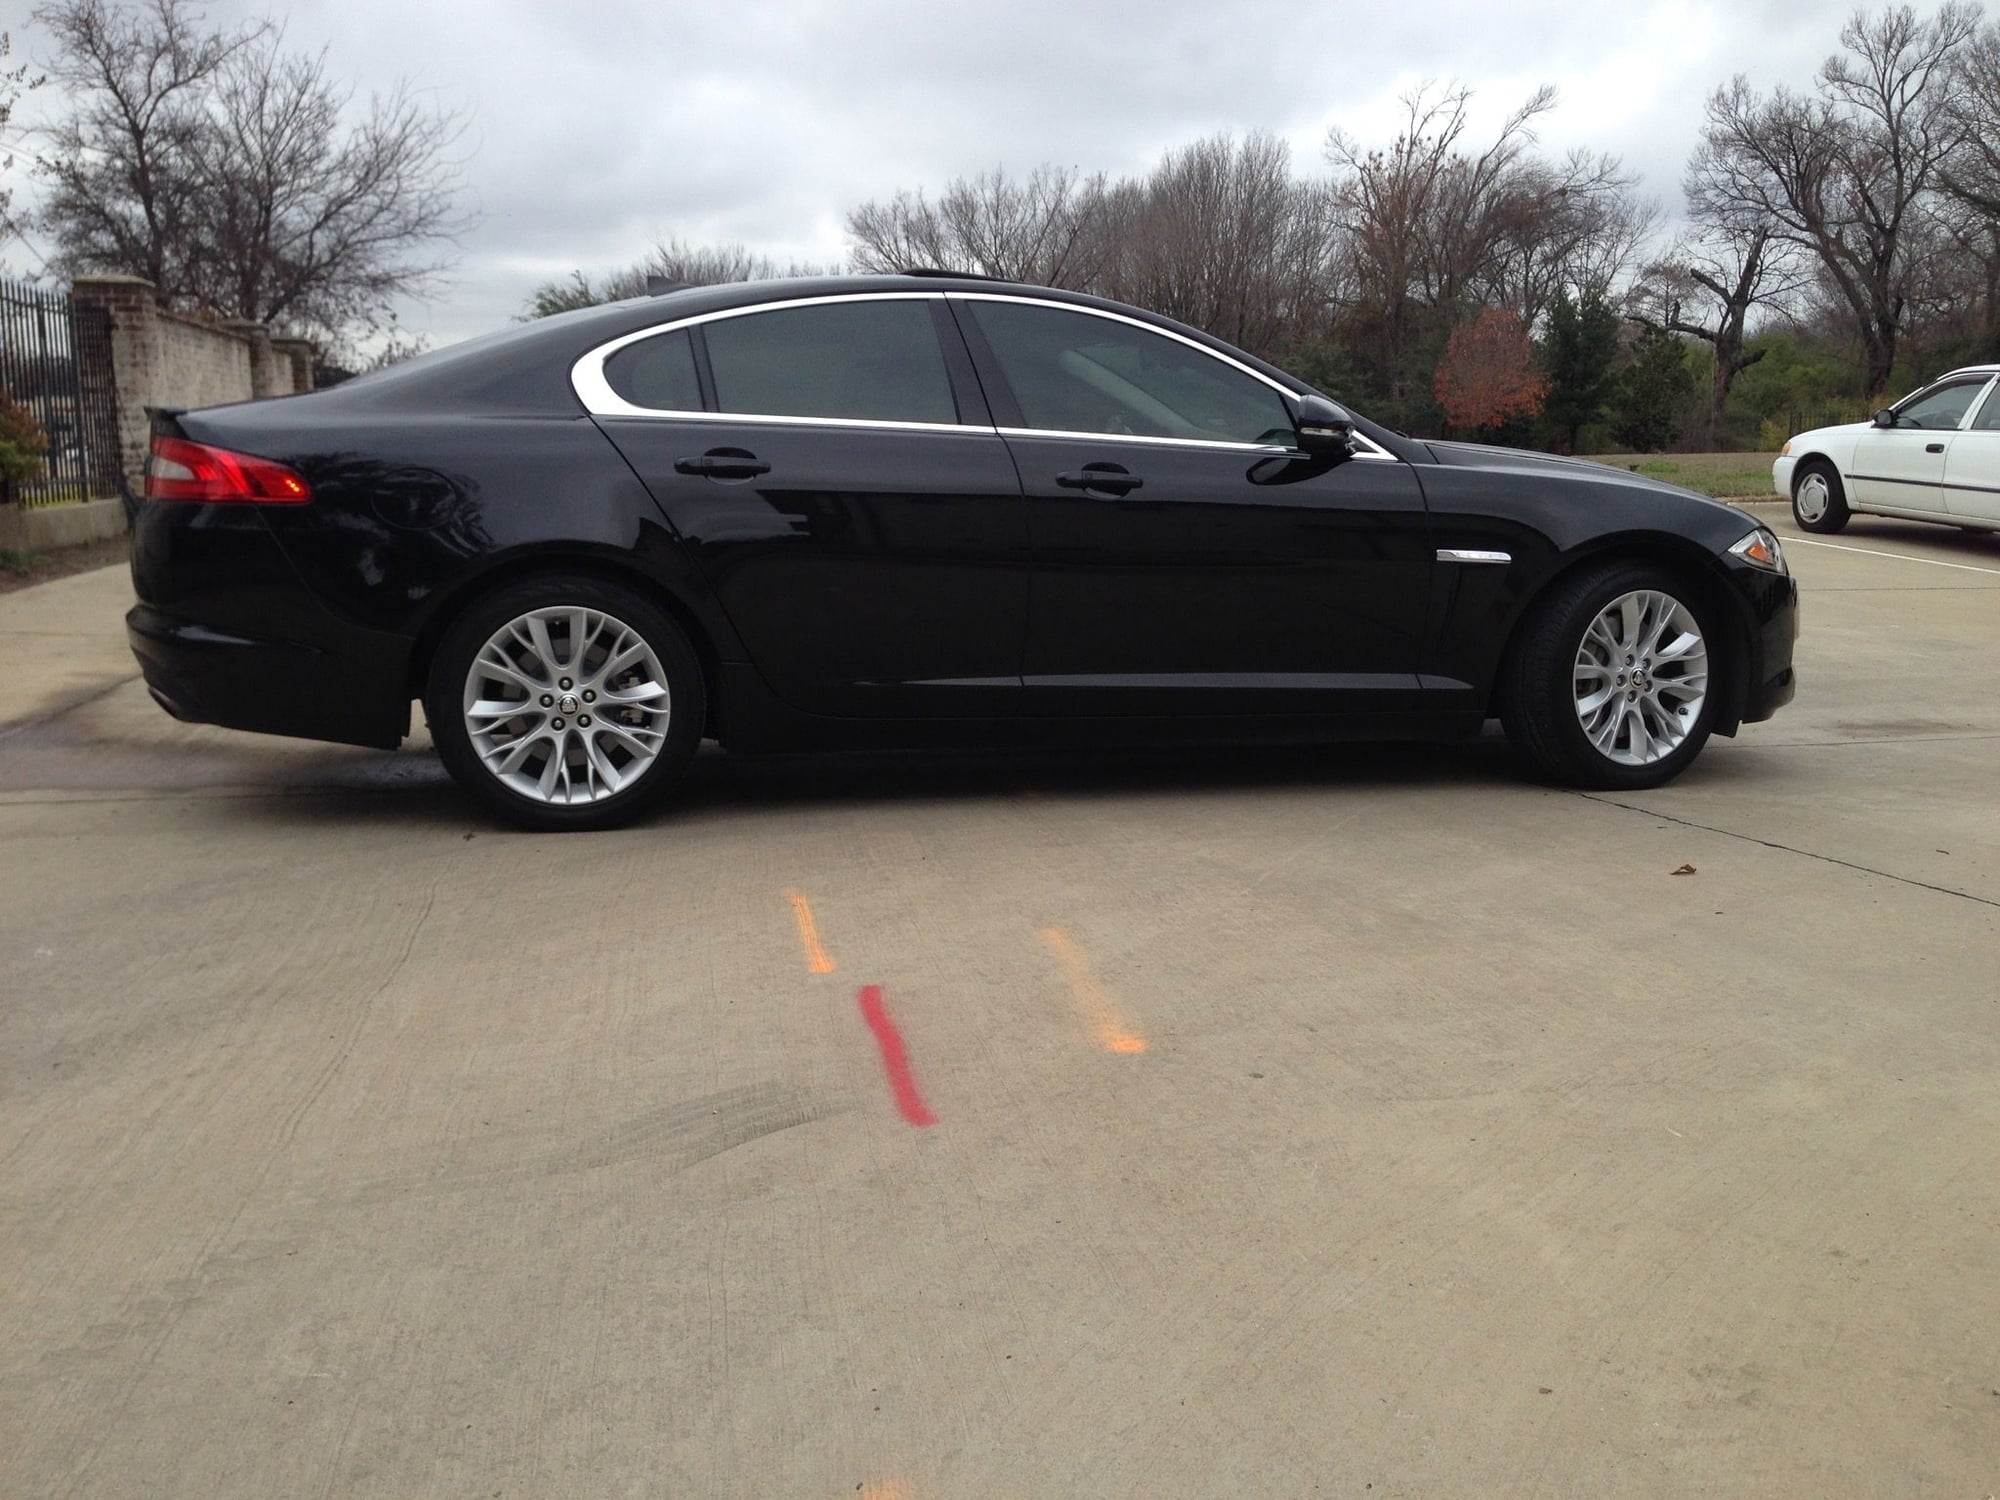 Wheels and Tires/Axles - 2013 Jag XF OEM Wheels & Tires 245/45/18 - Used - 2013 Jaguar XF - Dallas / Fort Worth, TX 76108, United States